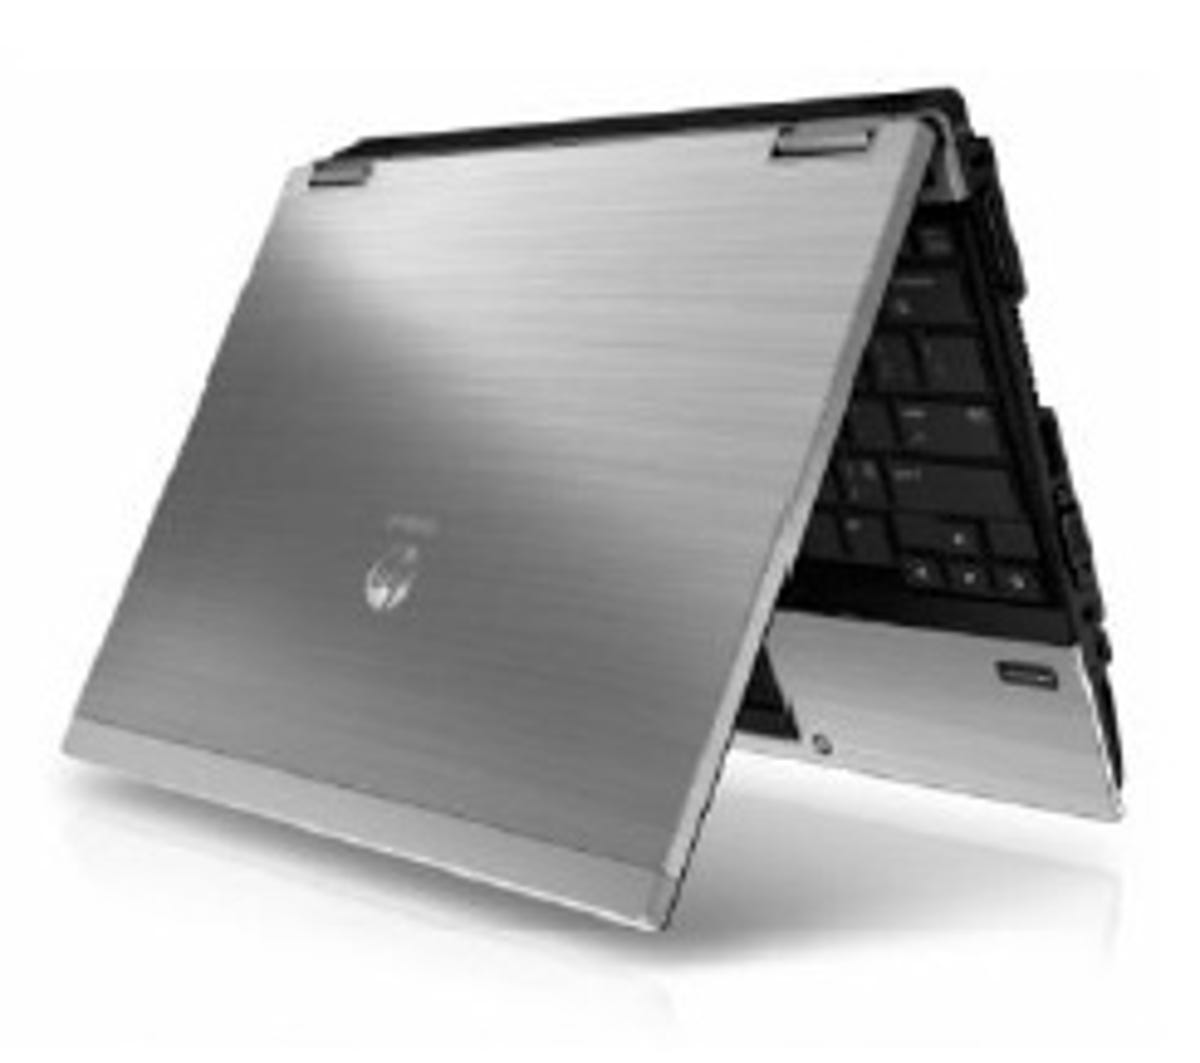 The 3.5-pound HP EliteBook 2530p/2540p is a road warrior used at many Fortune 500 companies.